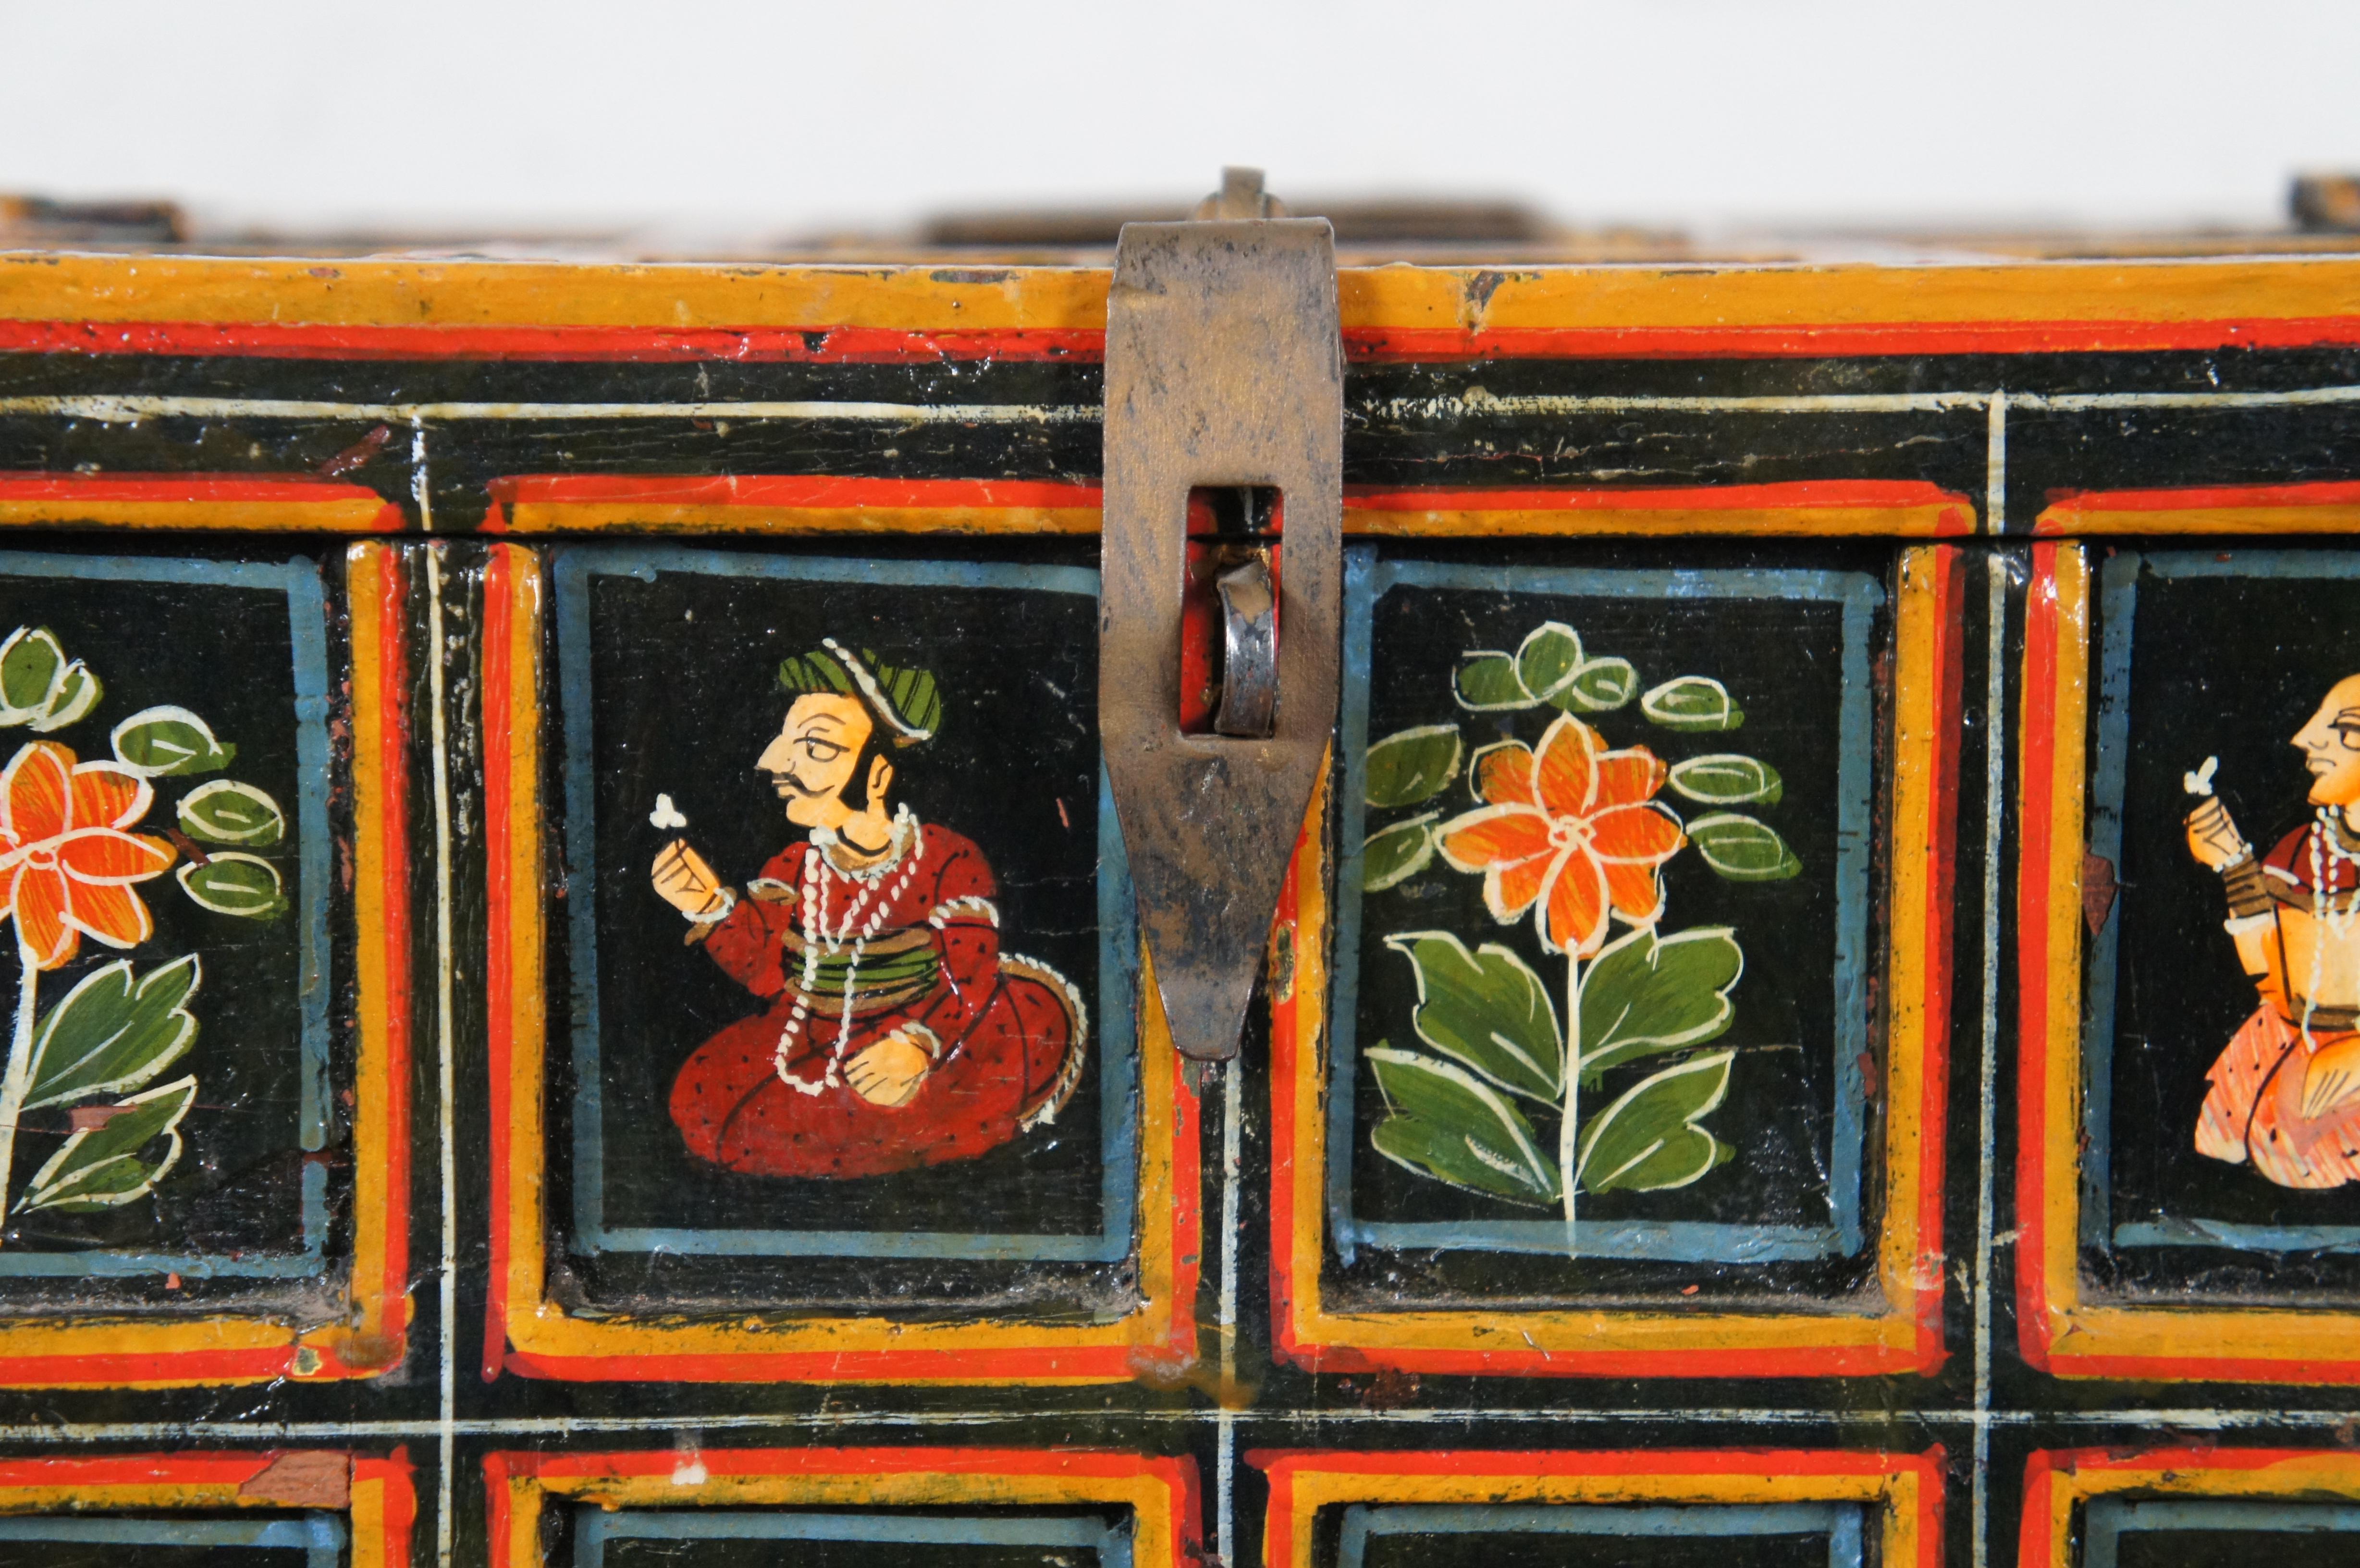 Antique Indian Mughal Polychrome Wood Panel Wedding Box Chest 15